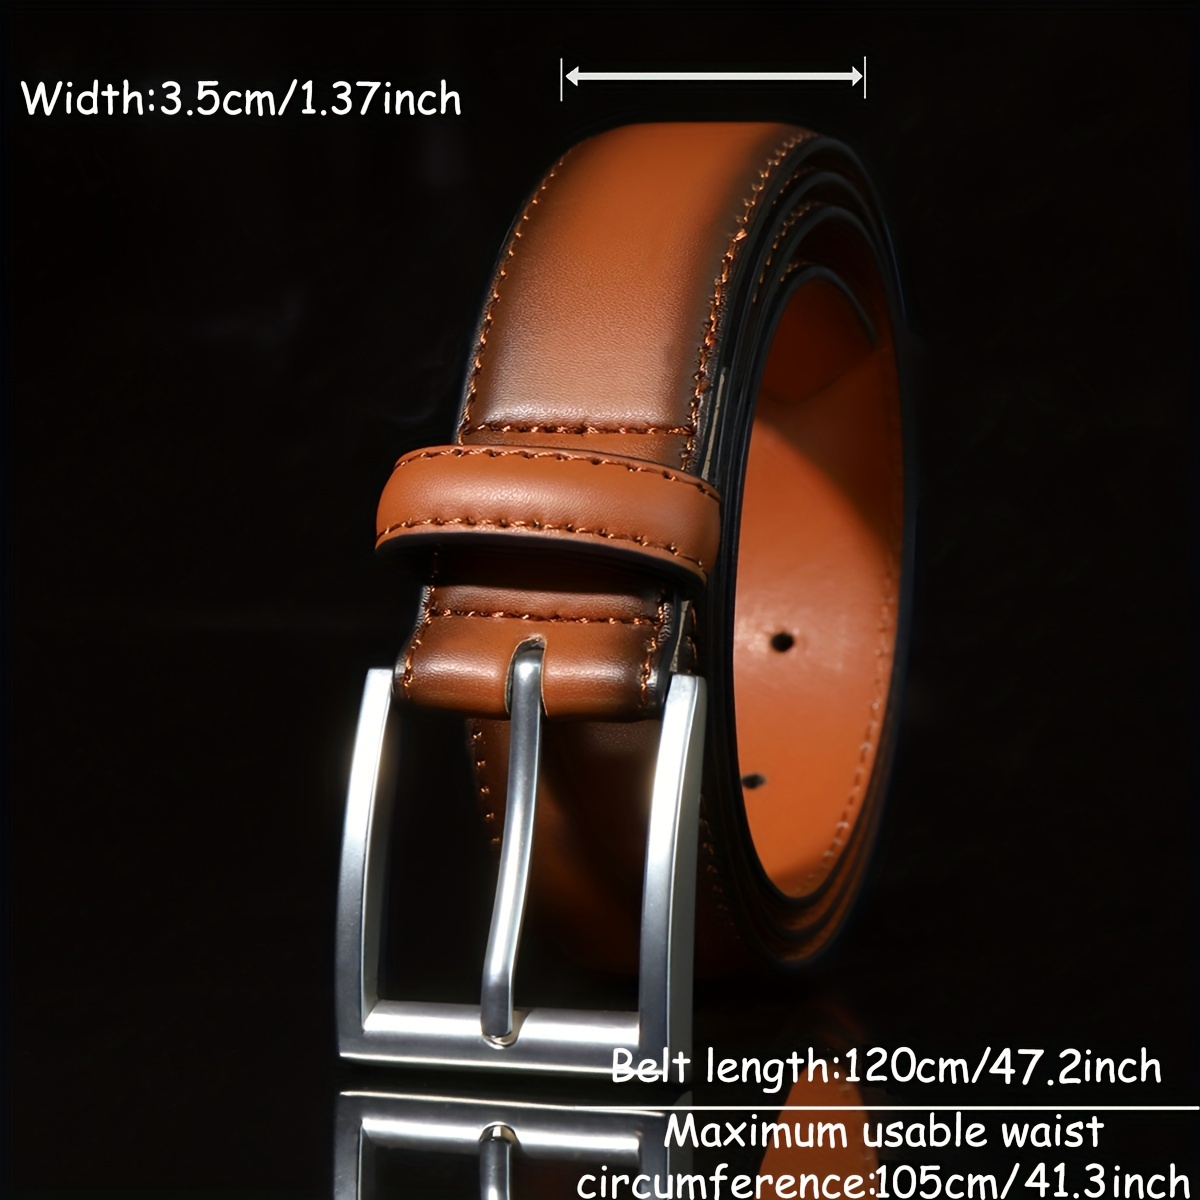 

1pc Men's Brown Belt, Square Zinc Alloy Needle Buckle Belt, Pu Leather Belt, Medium Waistband, Suitable For Daily Use